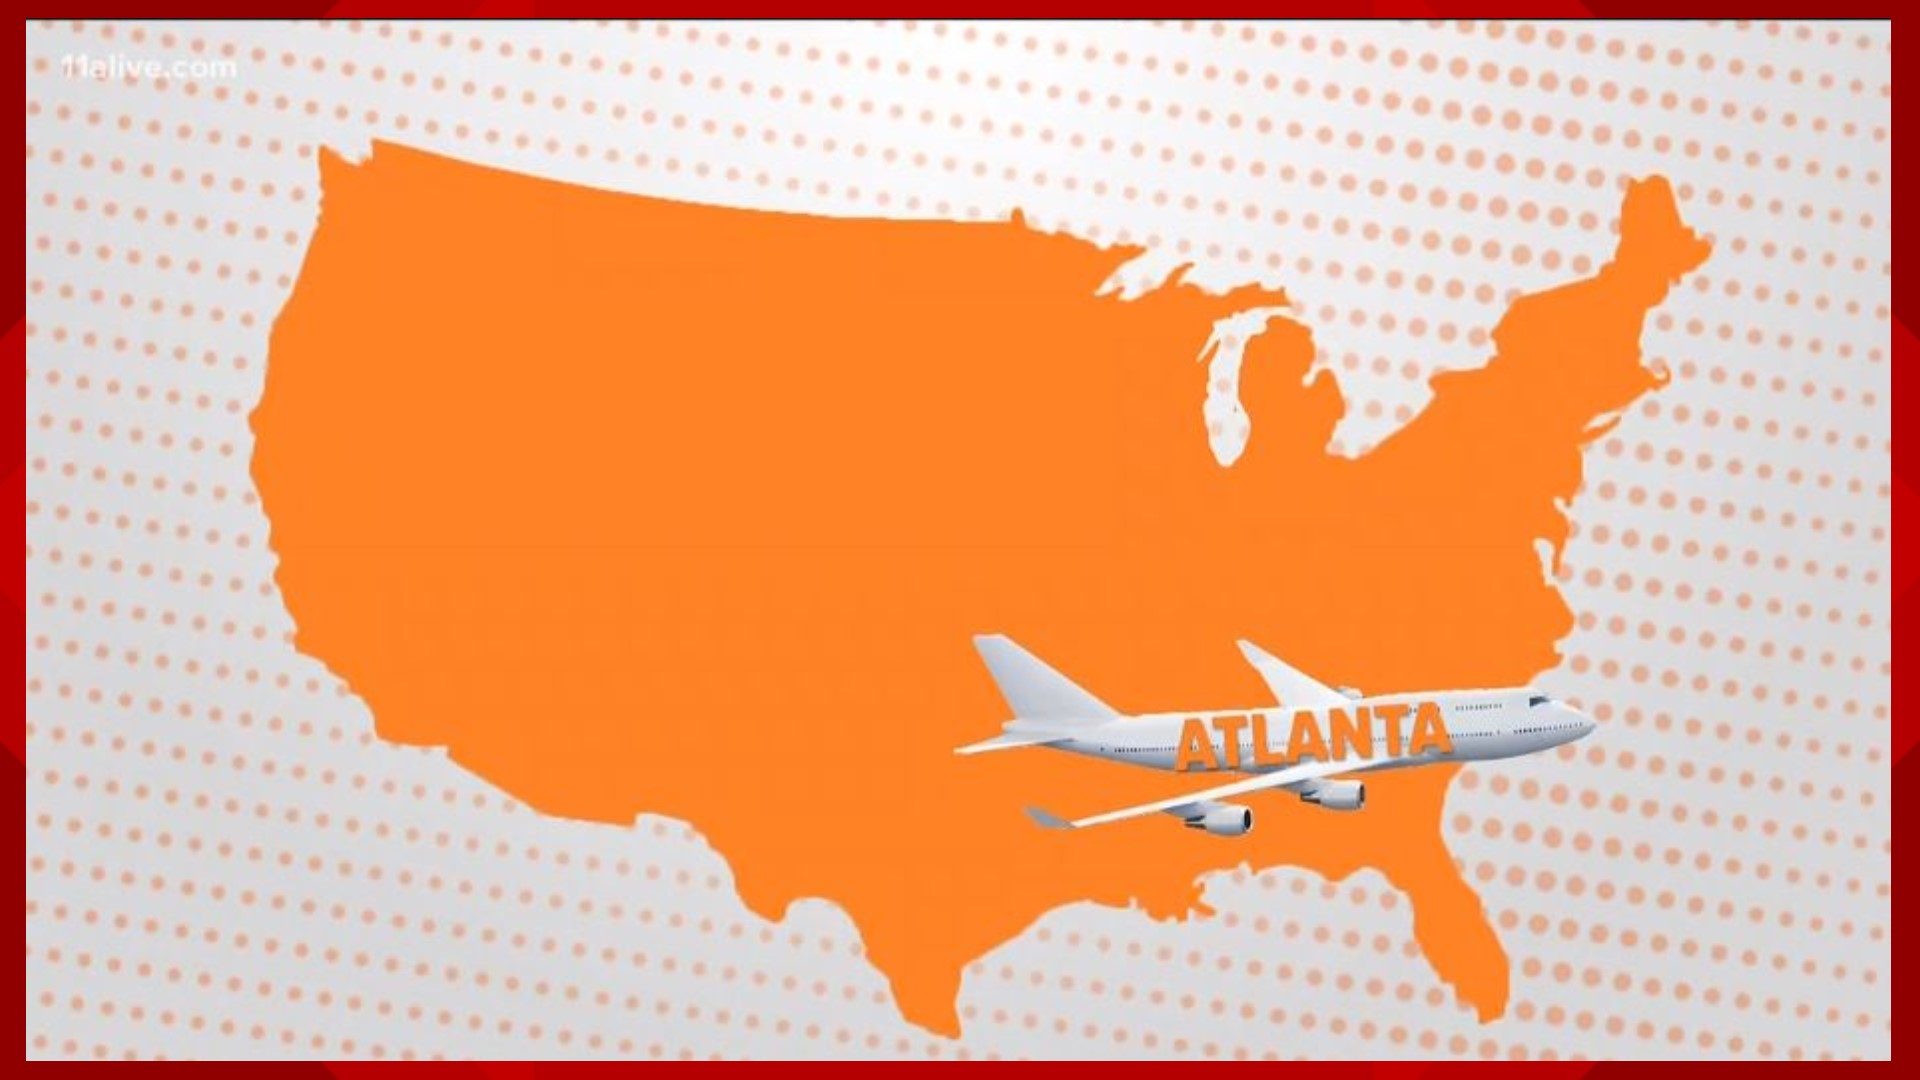 For the past twenty years, Hartsfield-Jackson International Airport had held the title of Busiest in the World. 11Alive's Why Guy explains why.